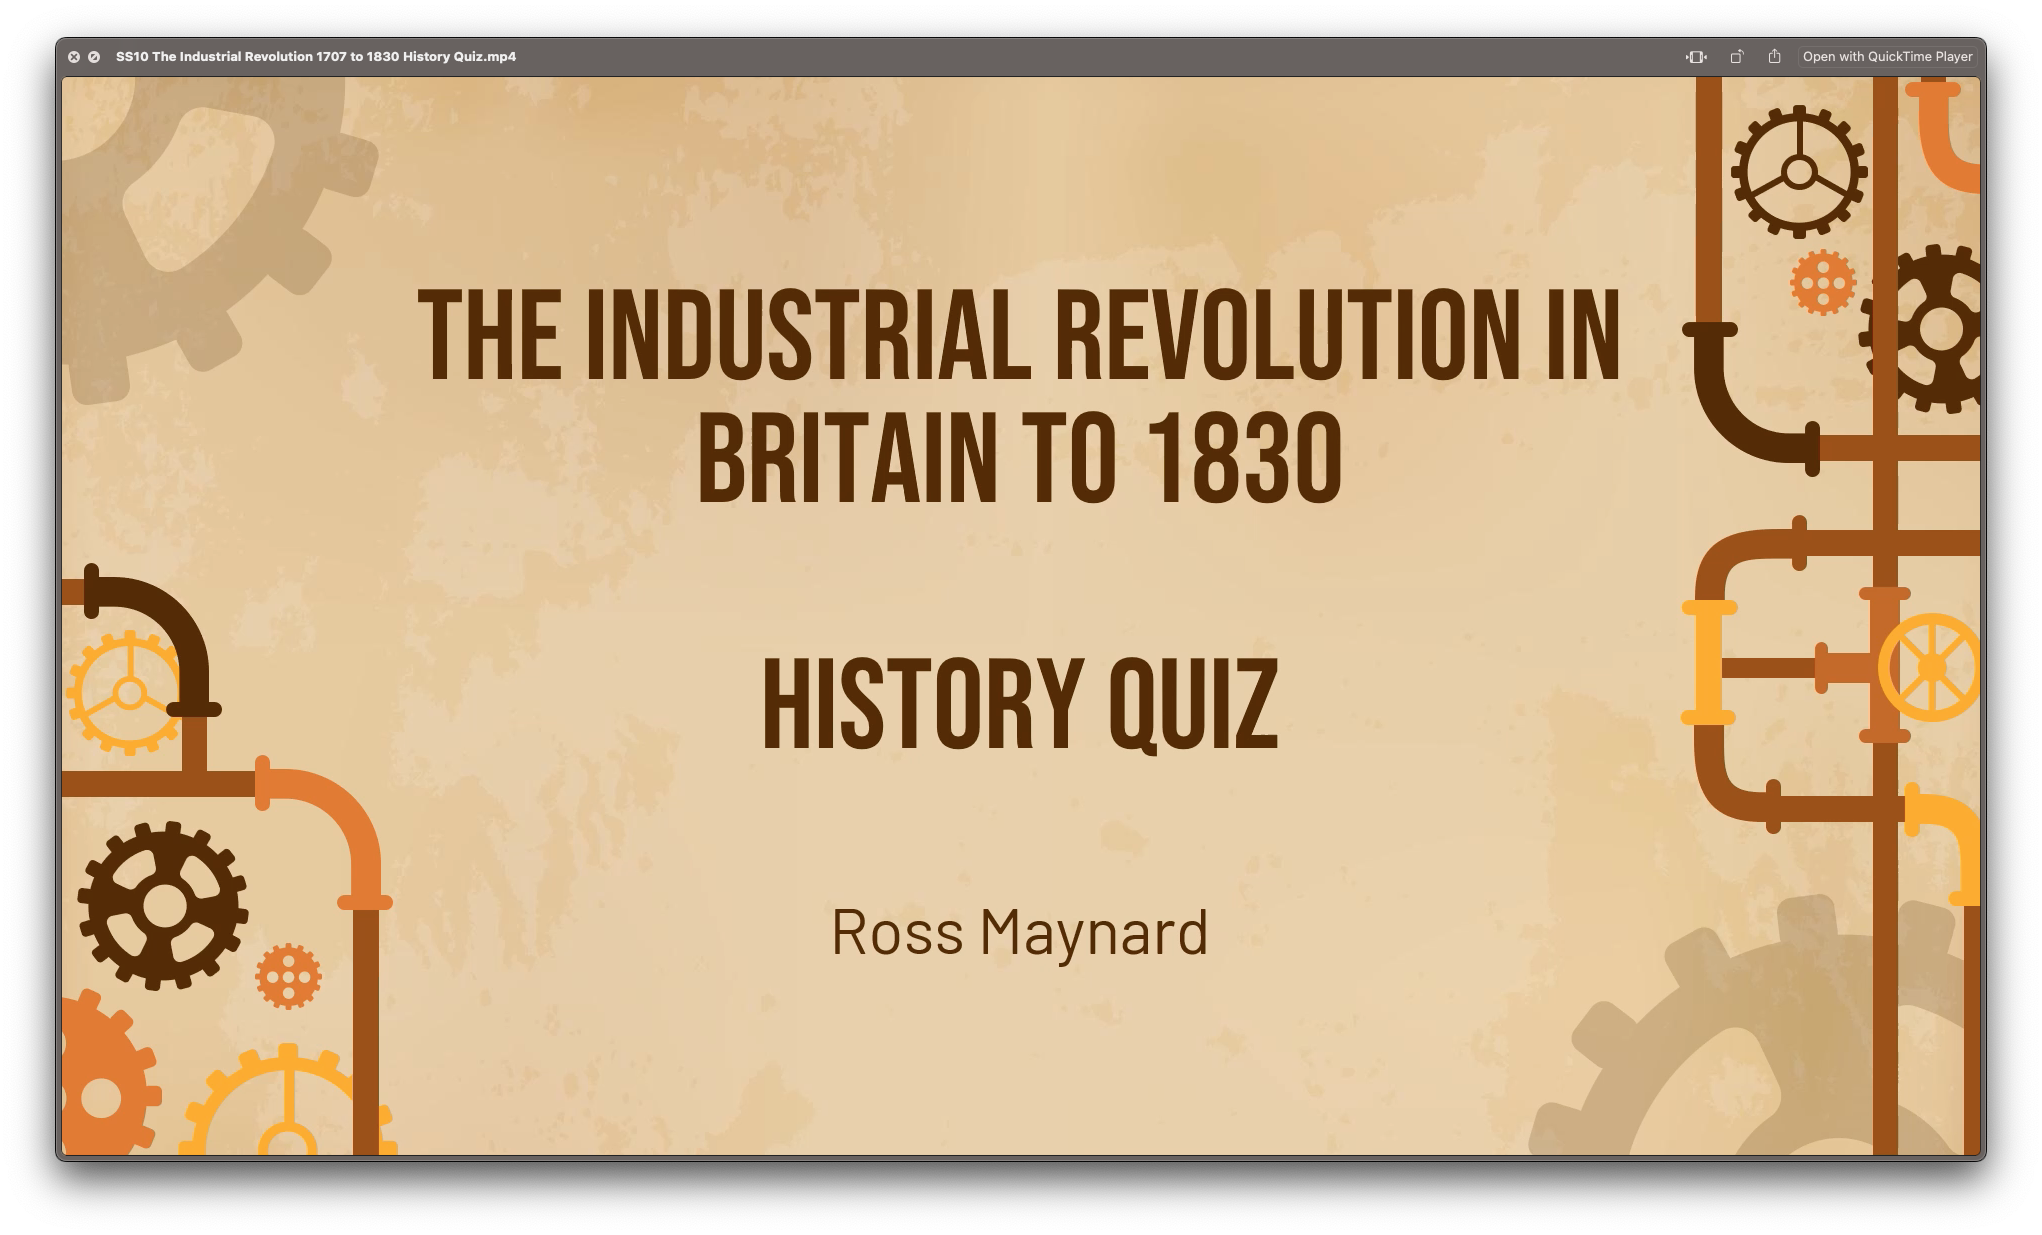 The Birth of the Industrial Revolution